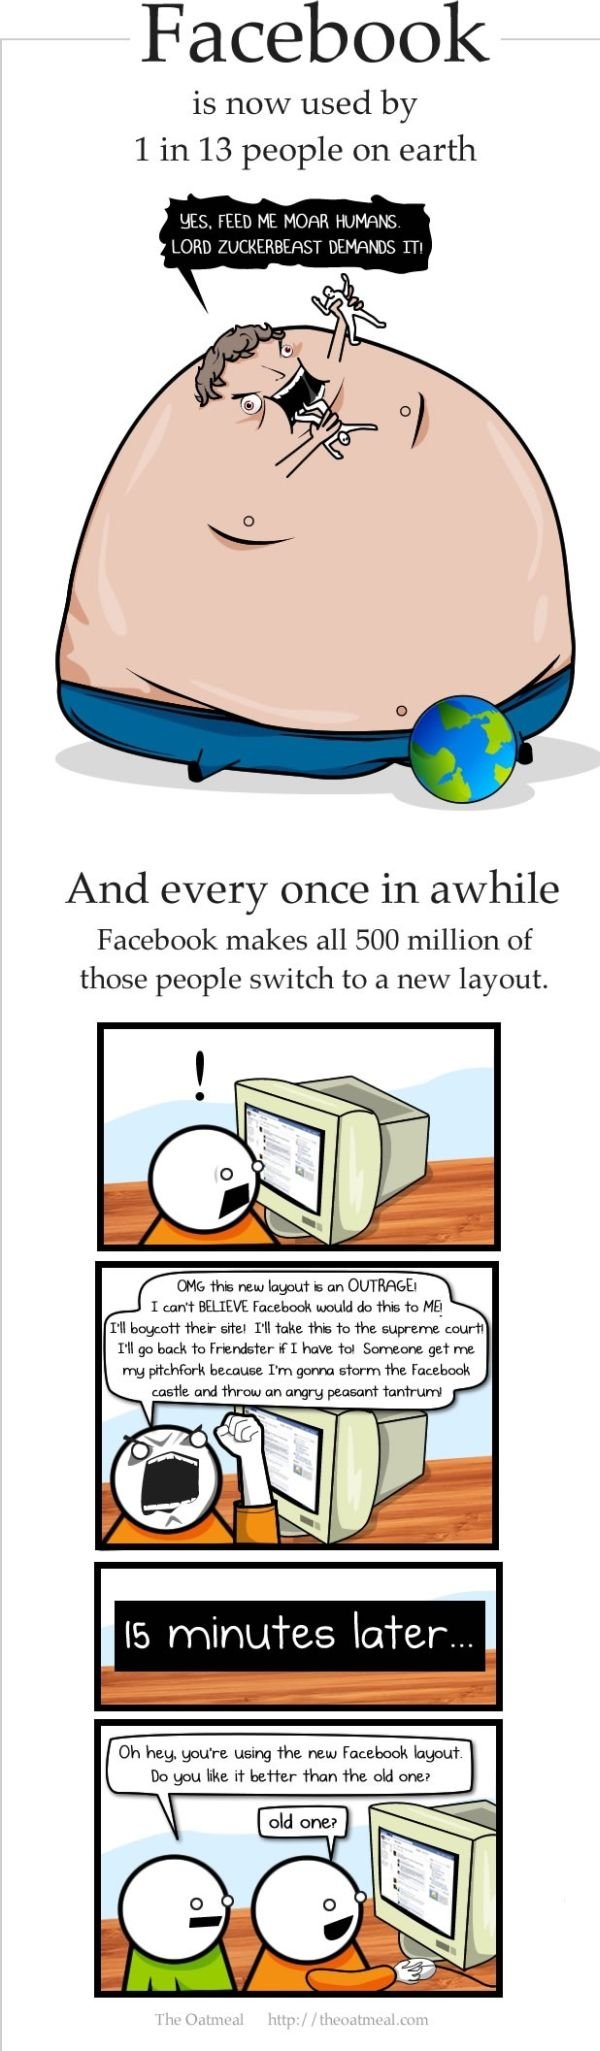 oatmeal facebook - Facebook is now used by 1 in 13 people on earth Yes, Feed Me Moar Humans Lord Zuckerbeast Demands Iti And every once in awhile Facebook makes all 500 million of those people switch to a new layout. Omg this new layout is an Outrage! I c